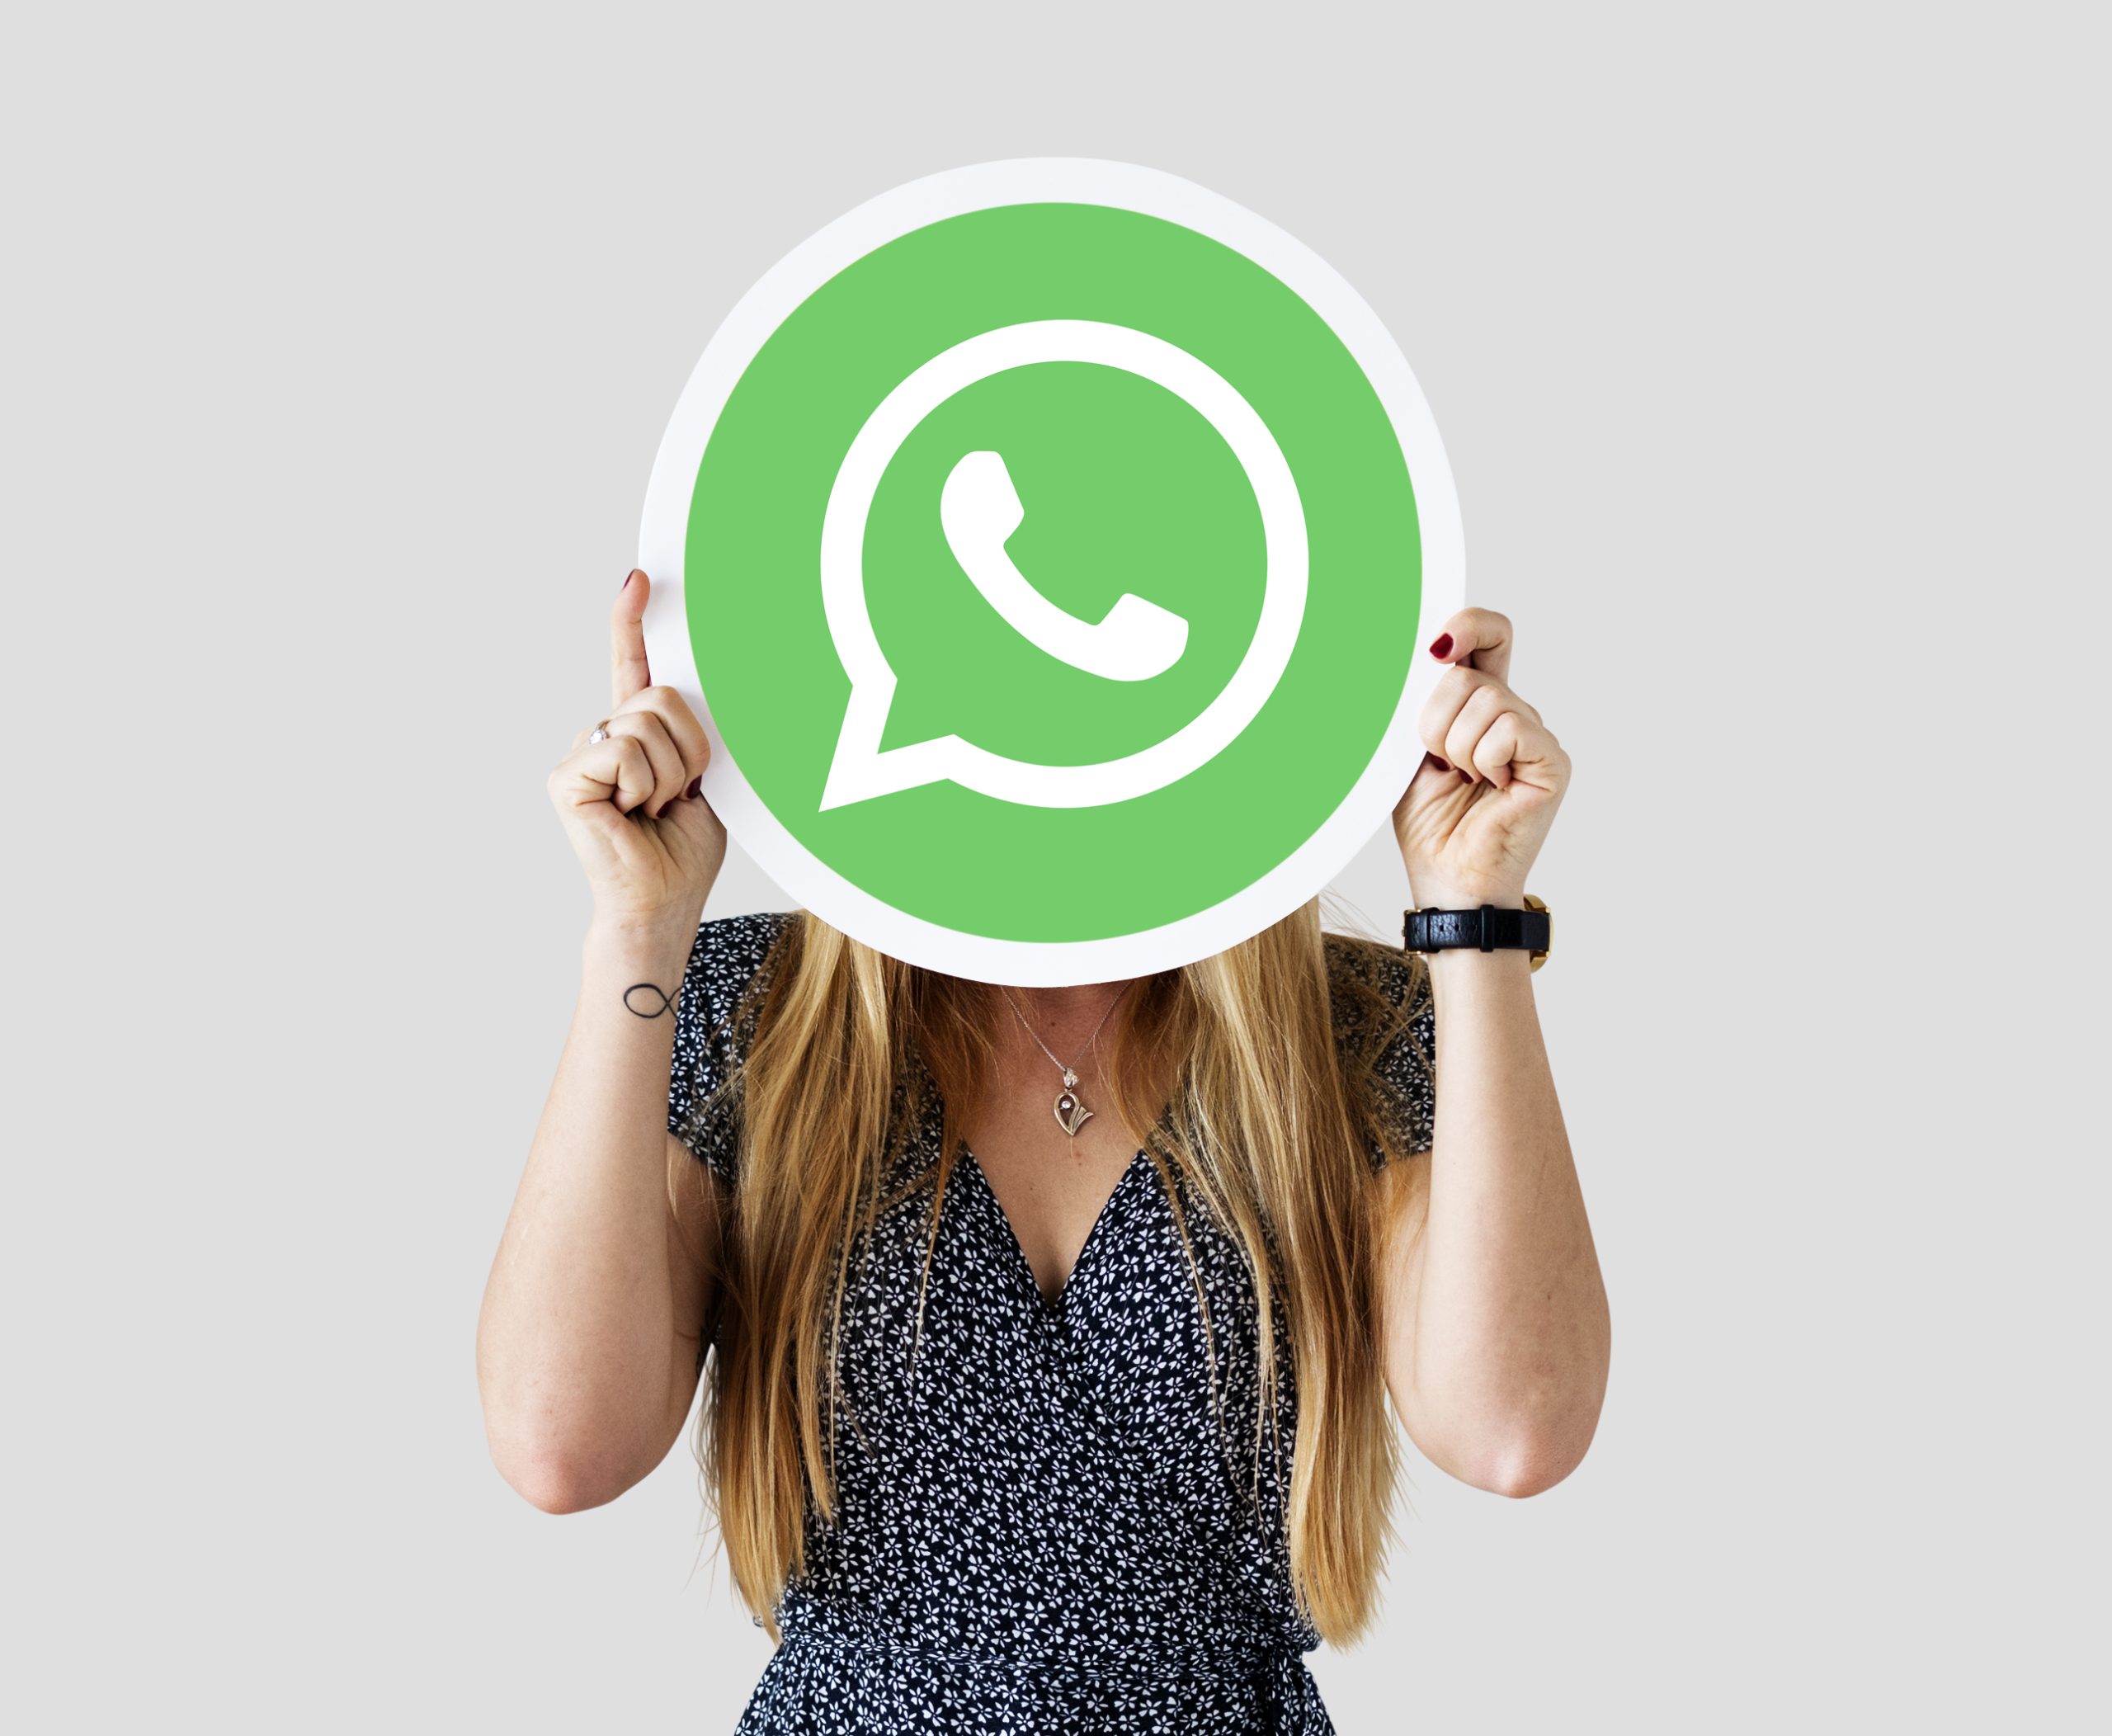 Whatsapp is introducing new feature